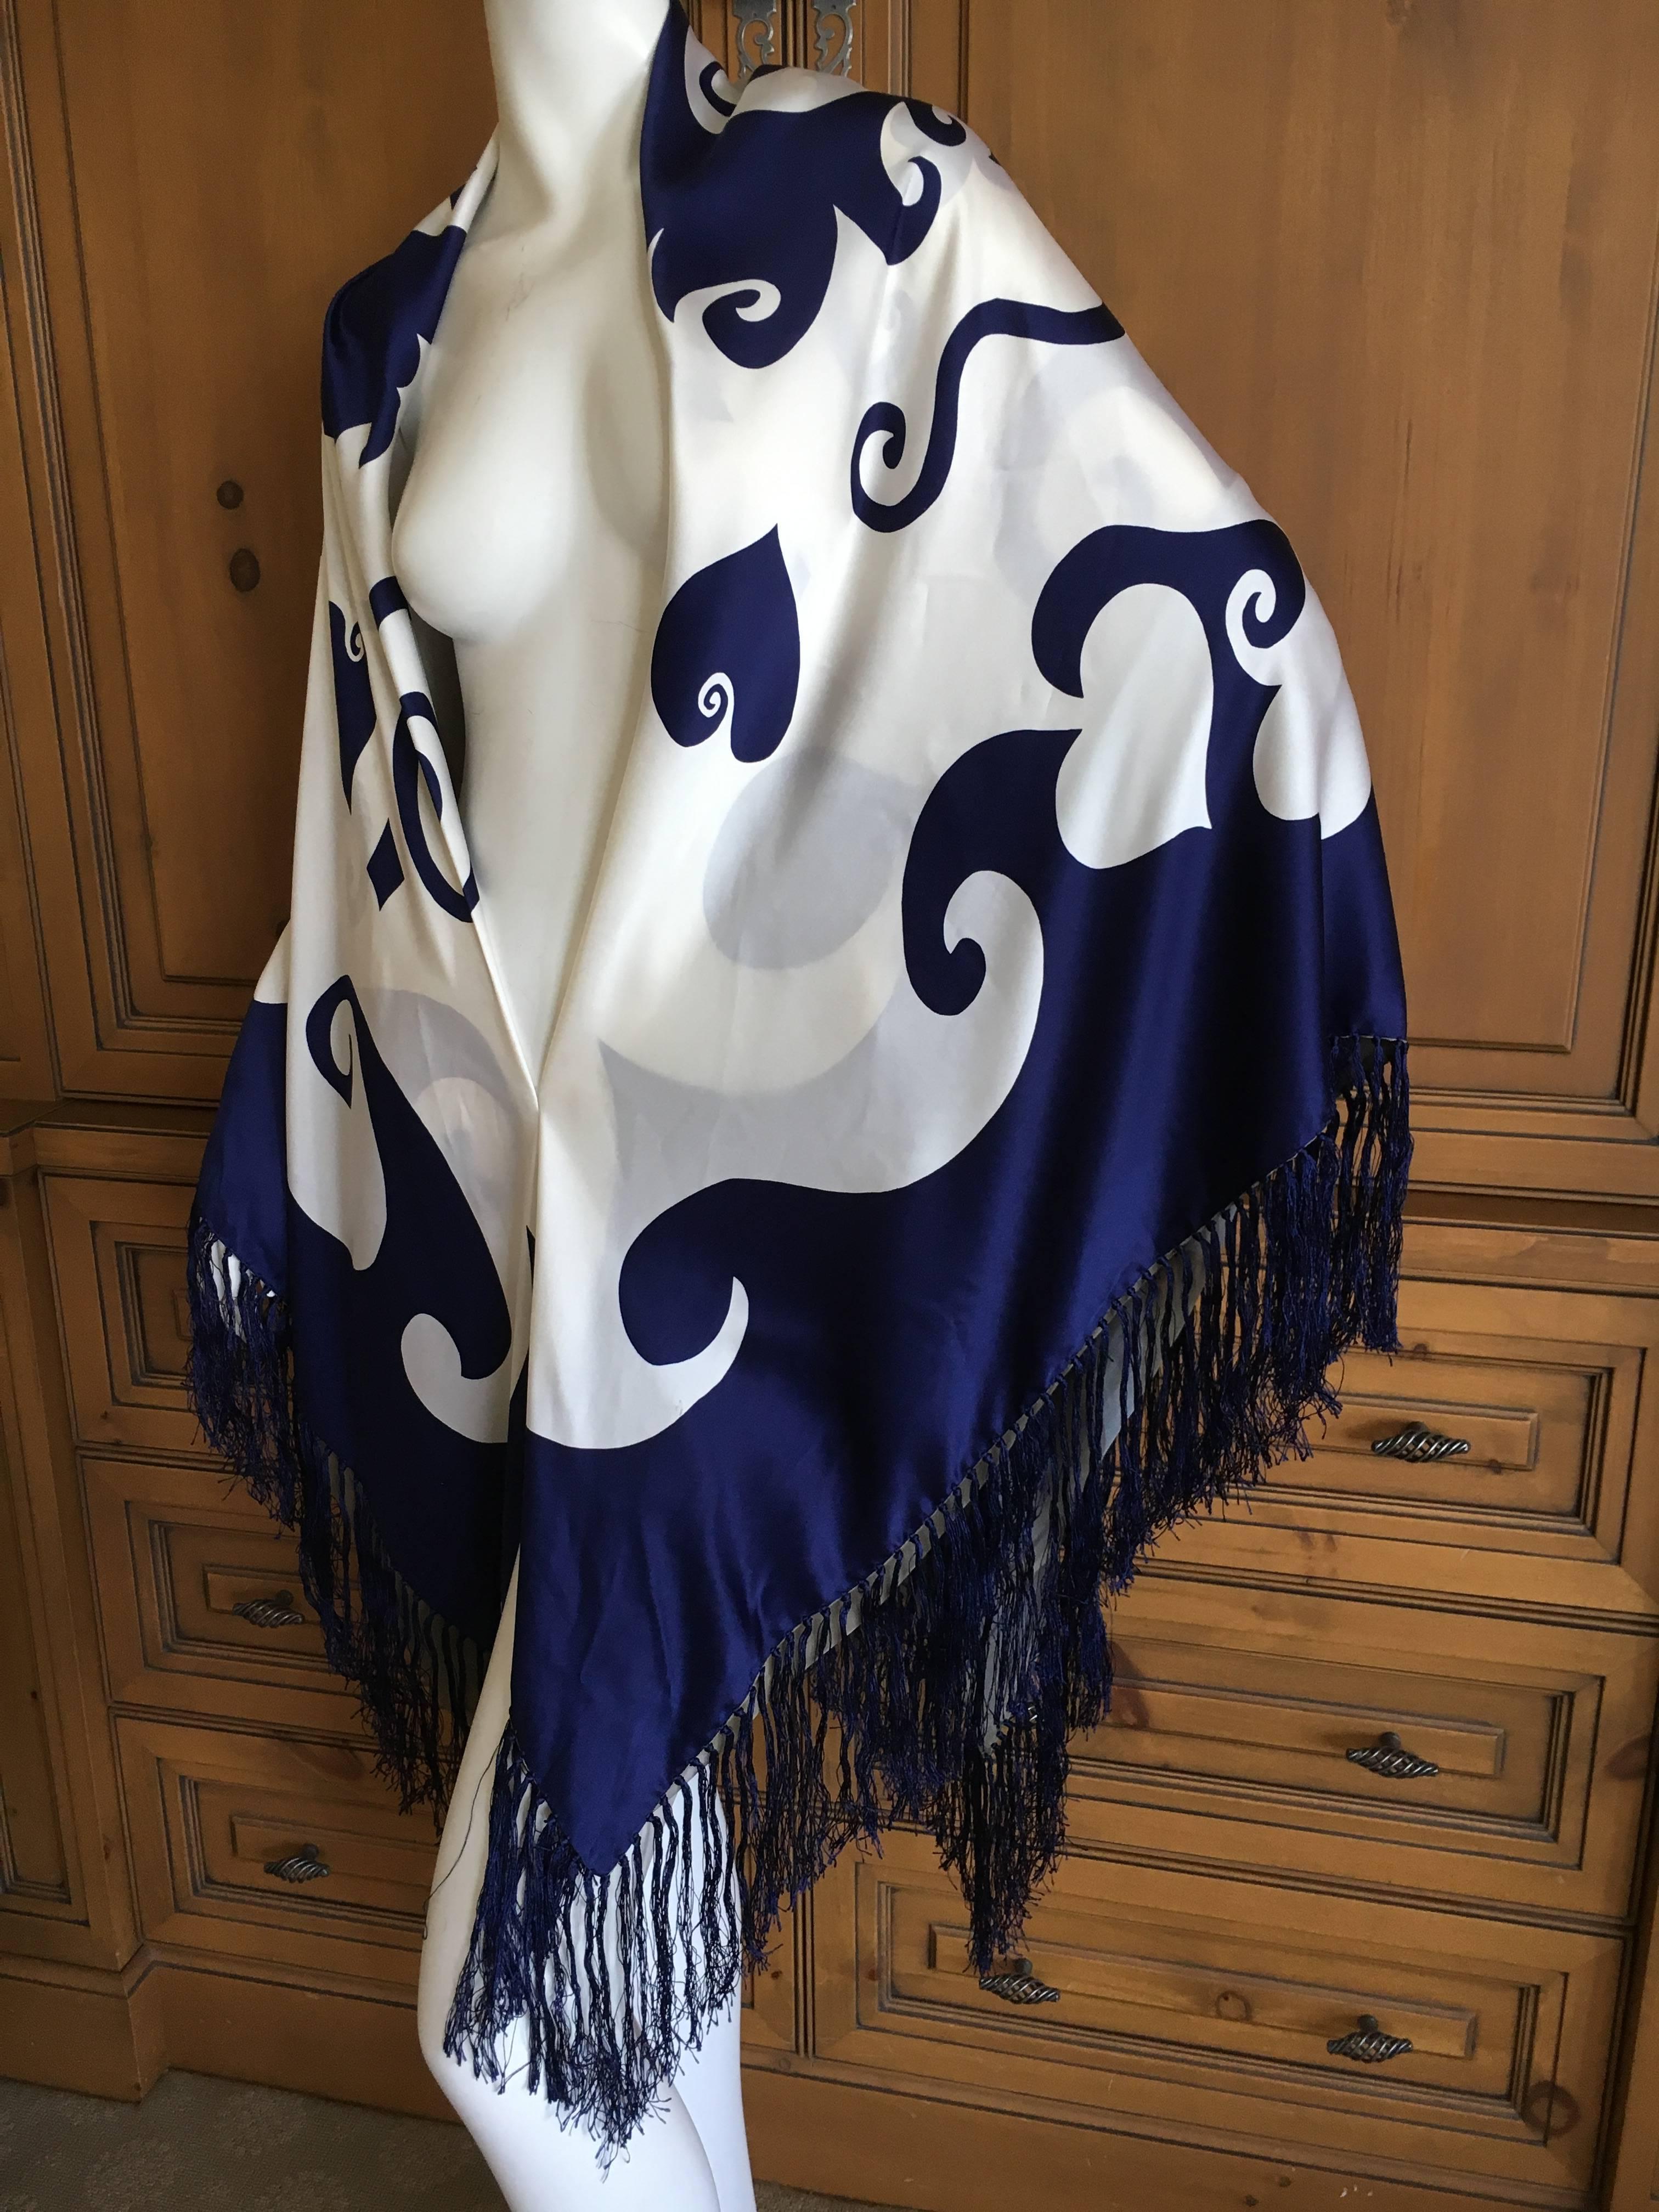 Christian Lacroix Arlesienne Pattern Reversible Silk Piano Fringe Scarf.
There are multi layers of silk , two silk chiffon layers to creat the inside reversible pattern.
With out the fringe it measures 52"

